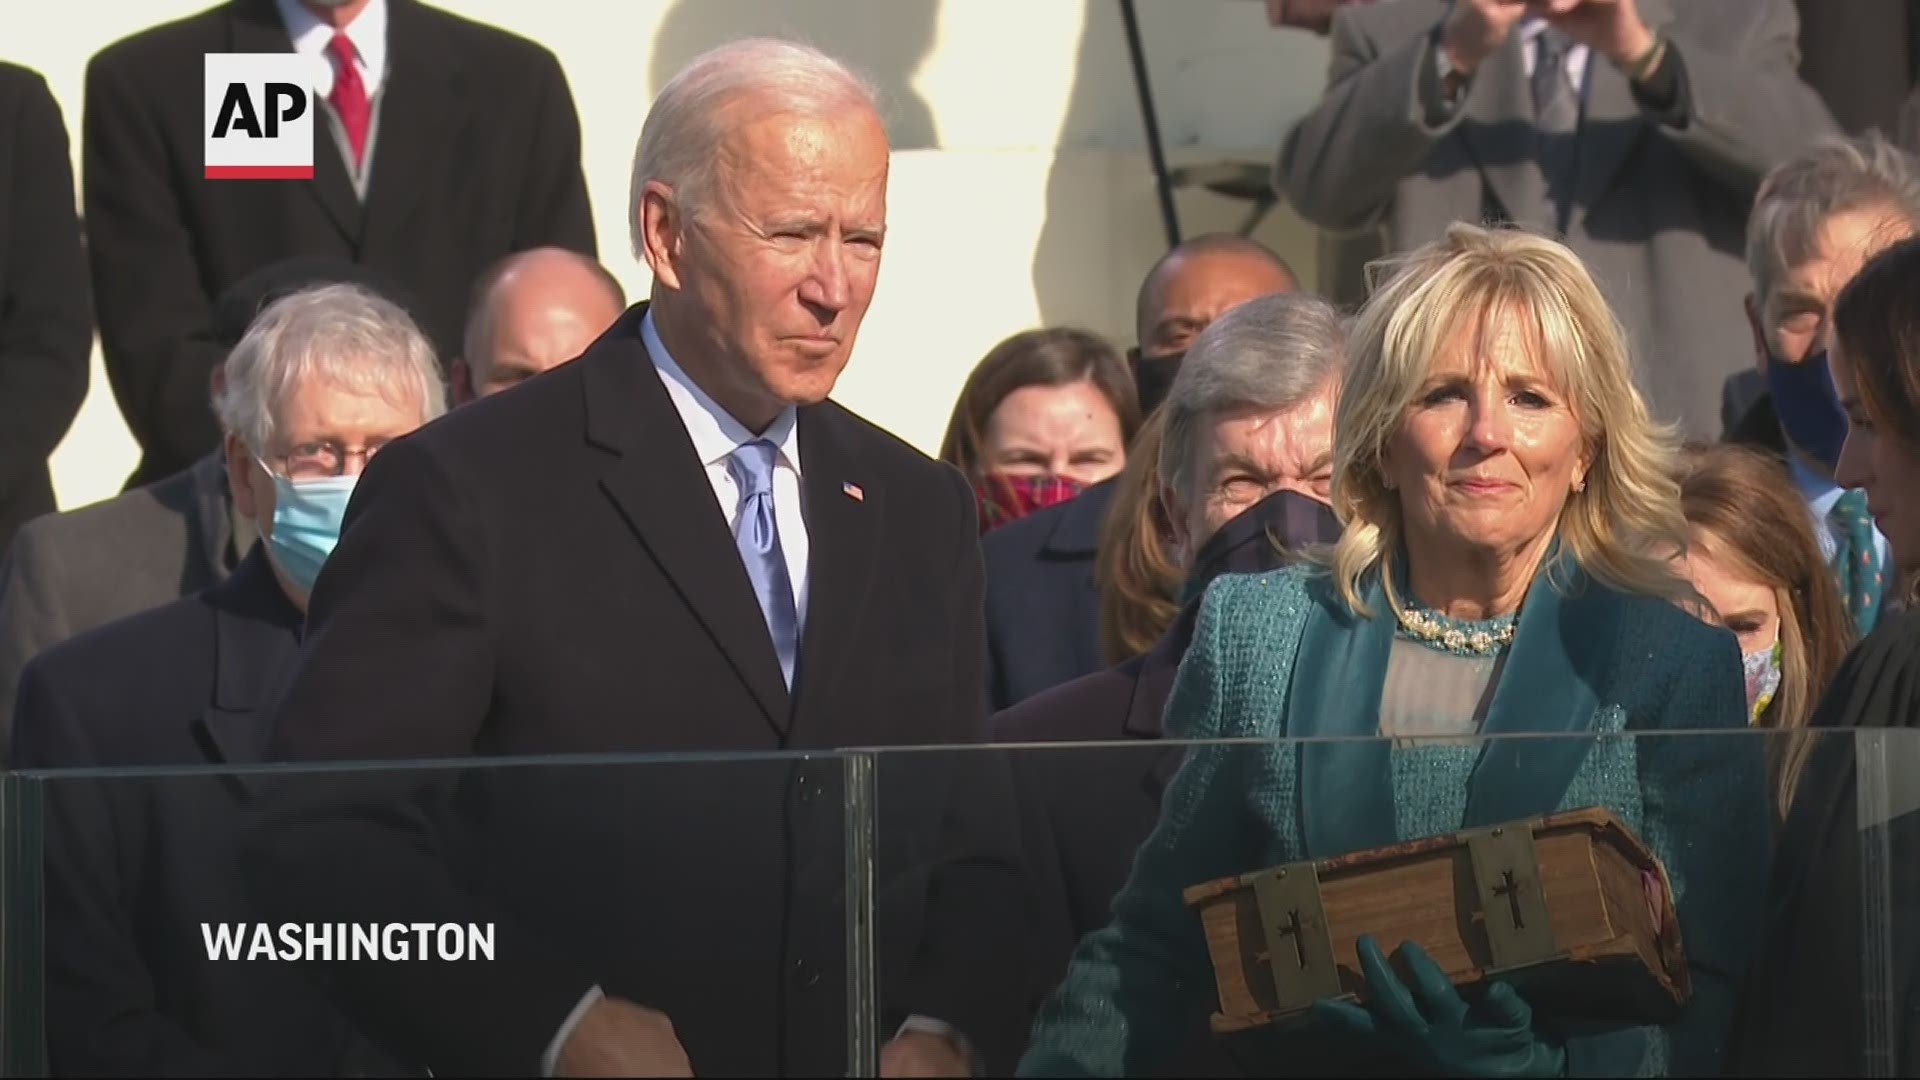 Watch The Moment Joe Biden Takes Oath Of Office As The 46th President Of The United States Thv11 Com